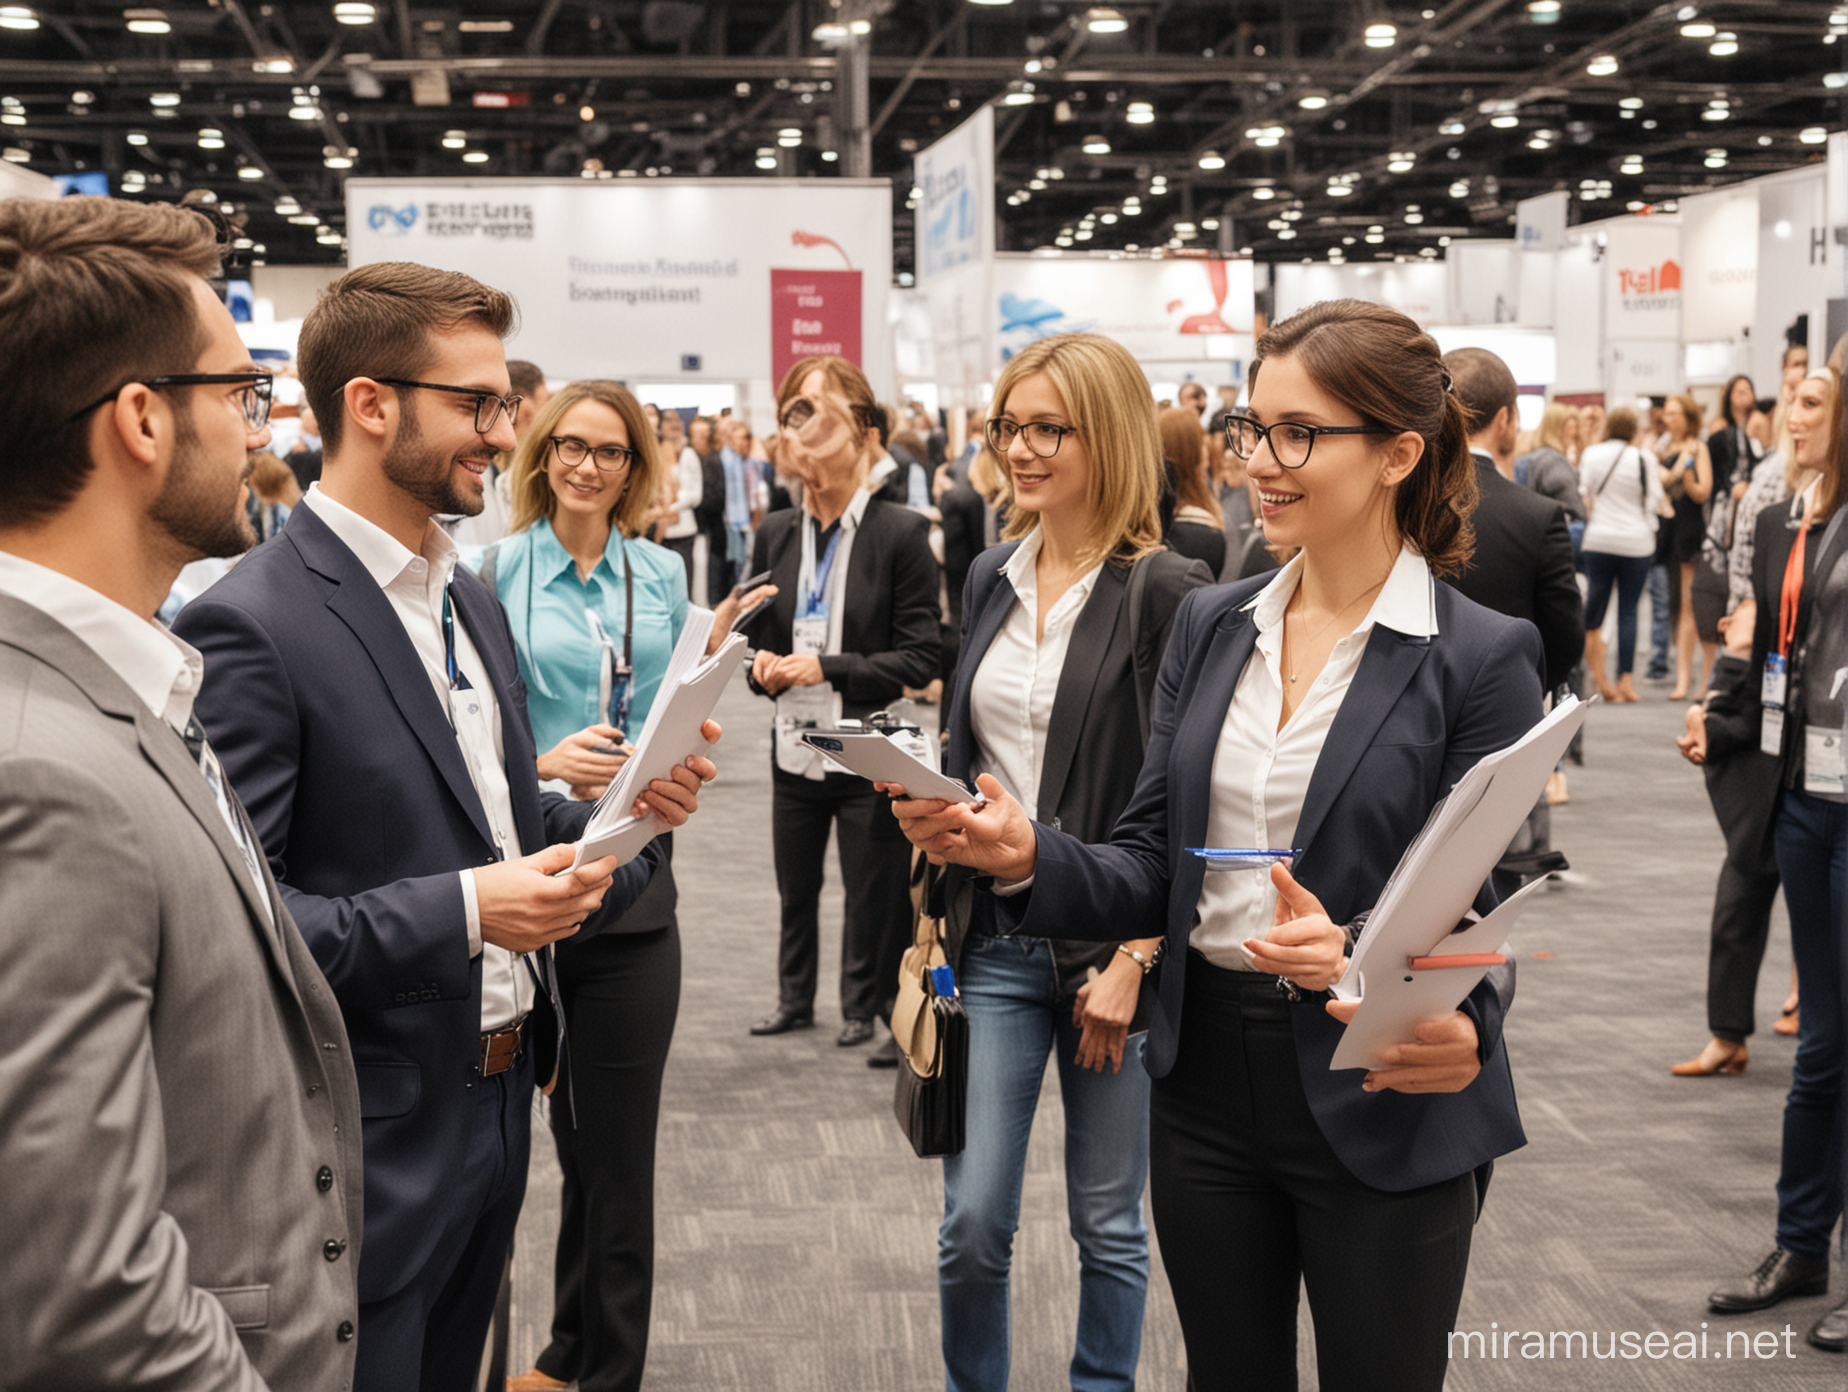 Professional Talent Management Experts Networking at Trade Show